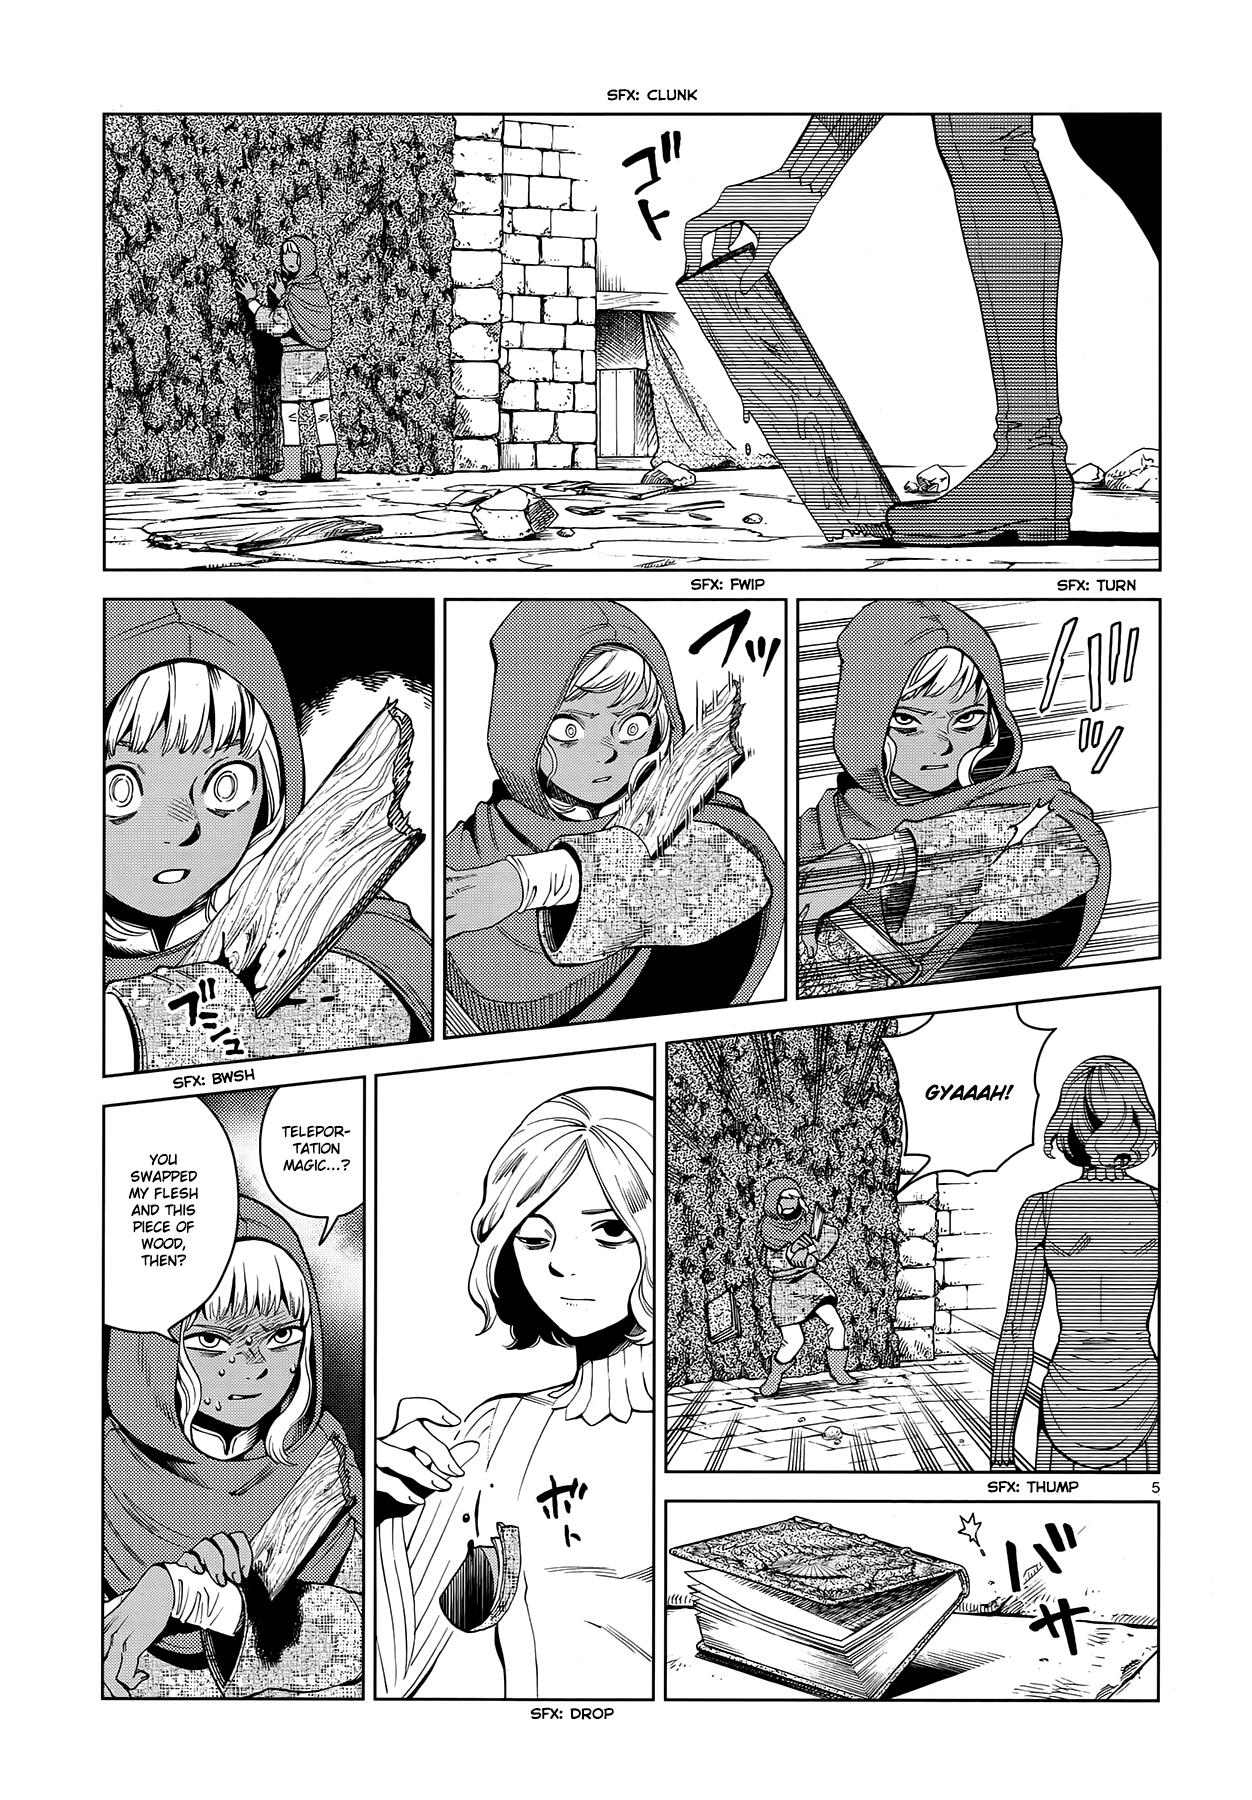 Dungeon Meshi Chapter 55: On The 1St Level, Part Iii page 5 - Mangakakalot